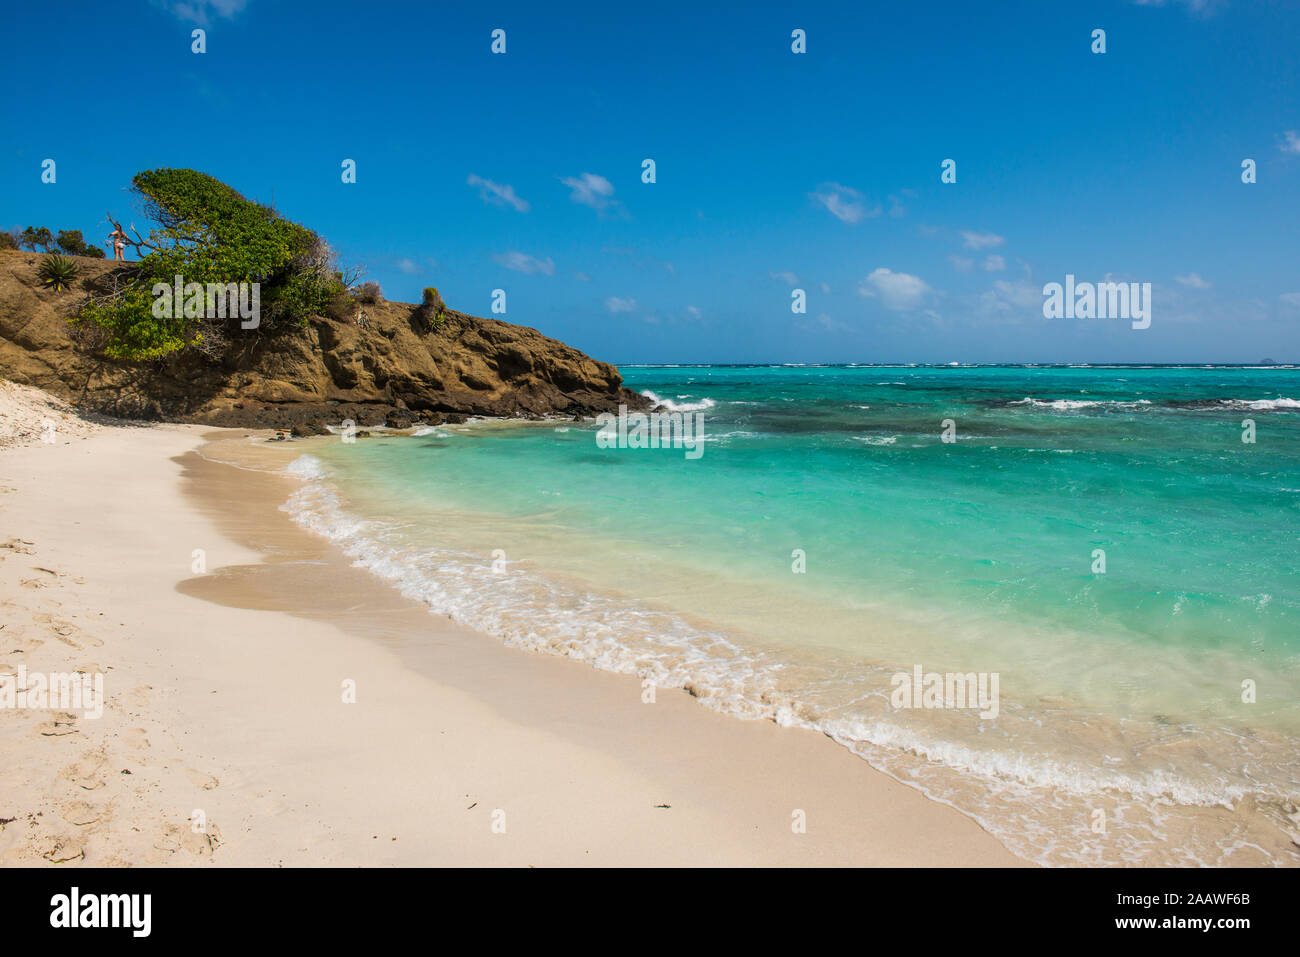 Scenic view of white sand beach in Tobago Cays, St. Vincent and the Grenadines, Caribbean Stock Photo